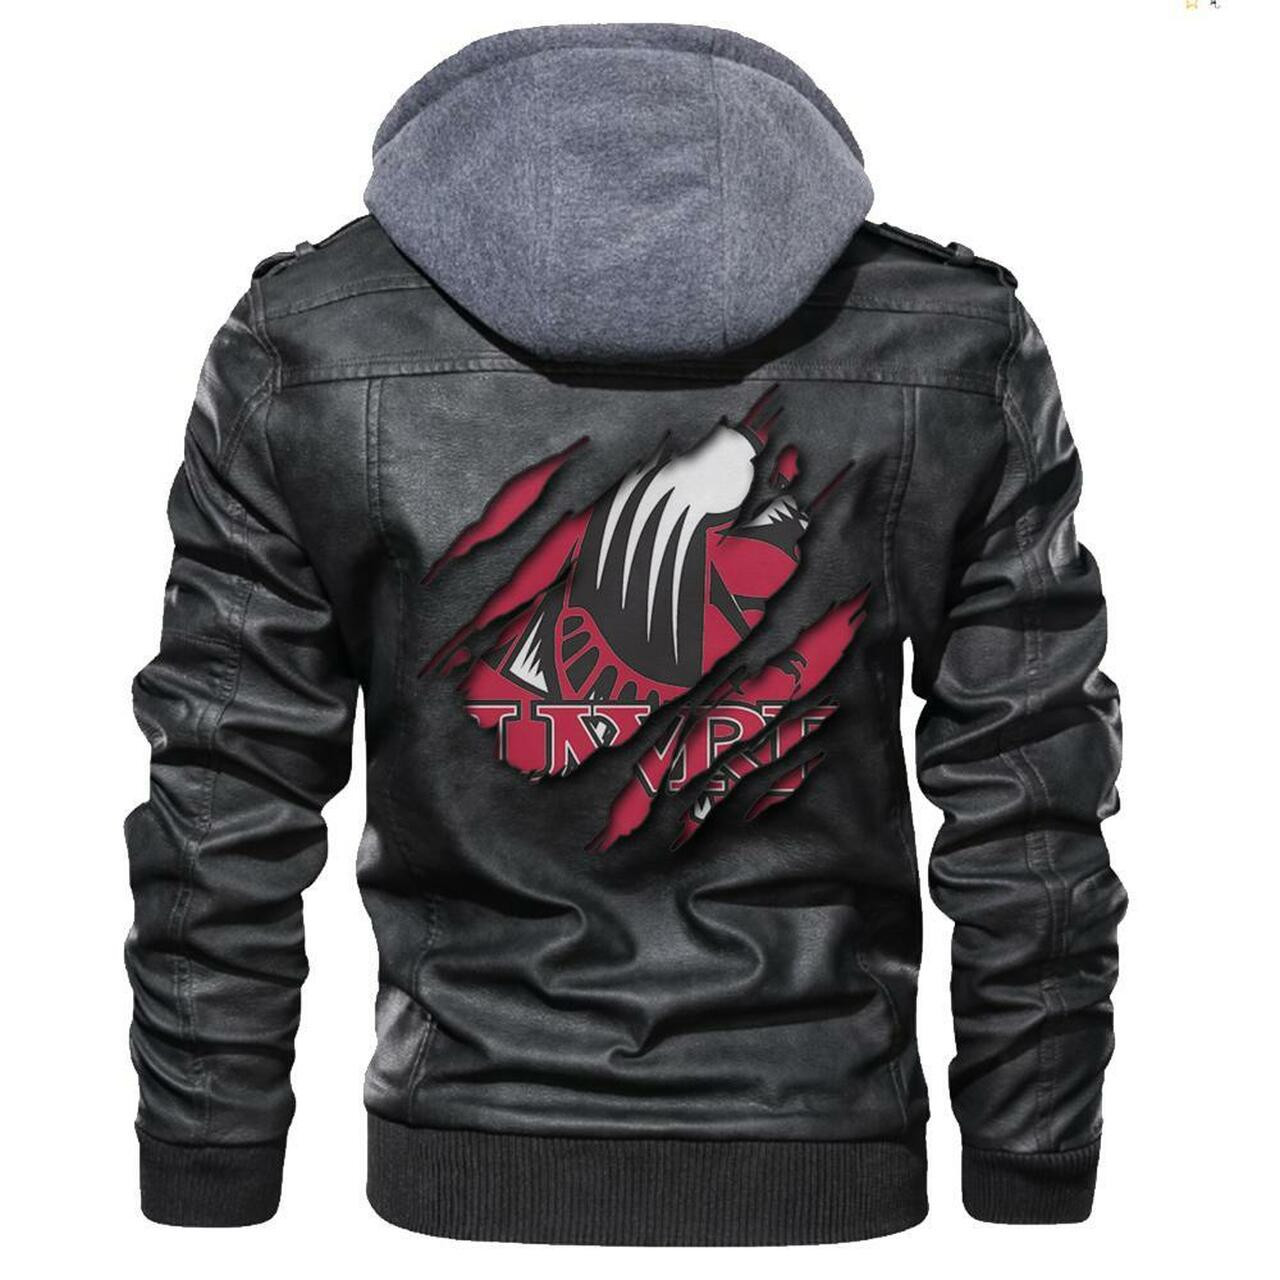 You'll get the best Leather Jacket by shopping online 175